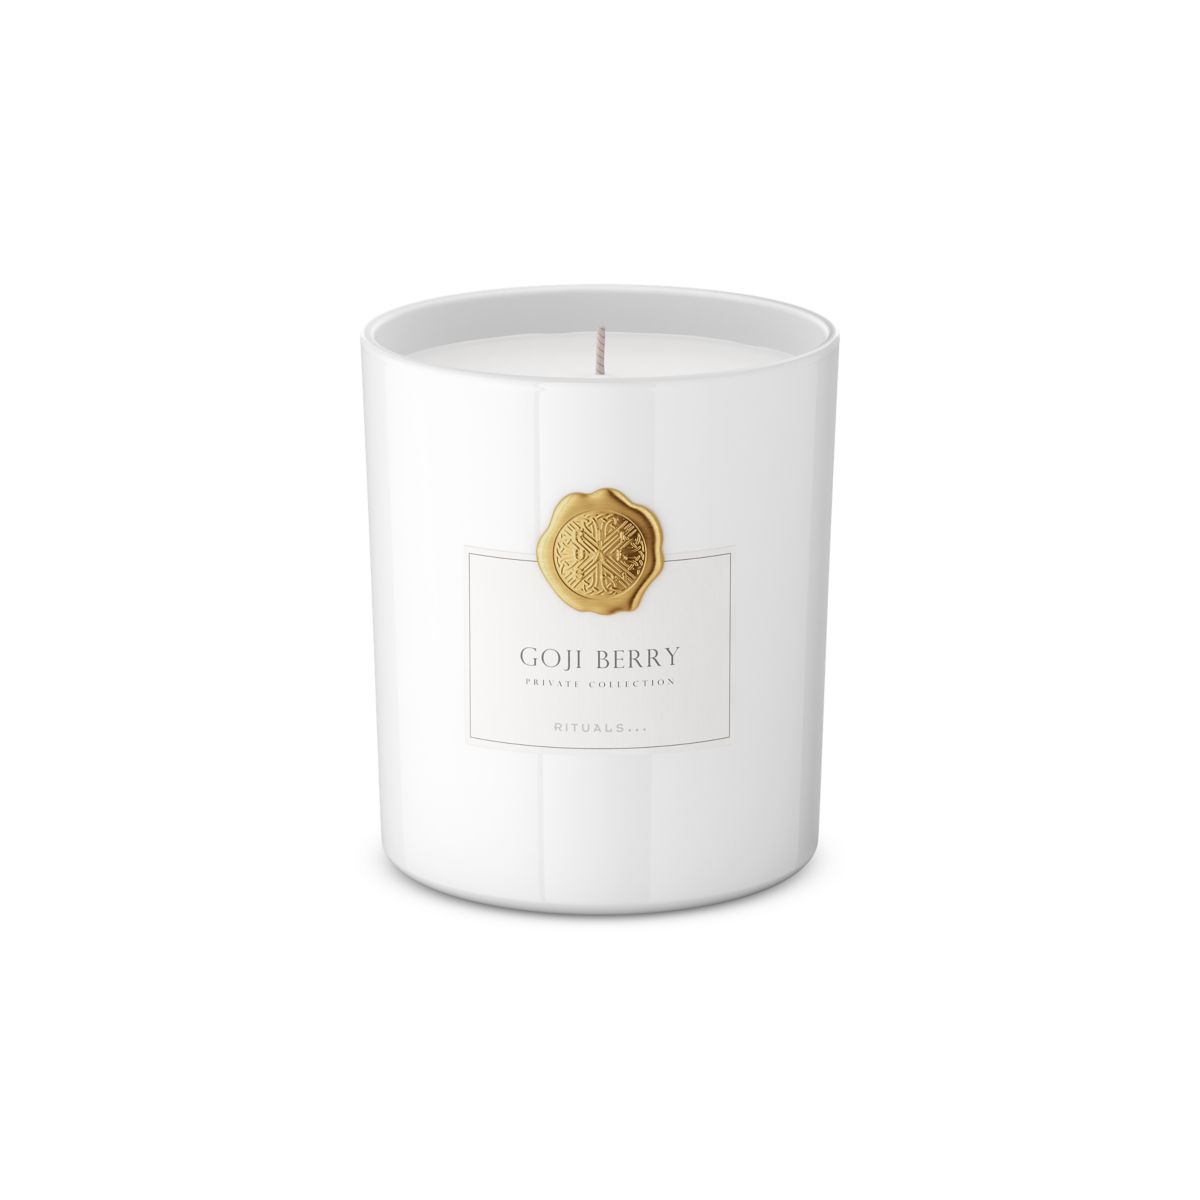 Rituals Luxury Scented Candle - Goji Berry